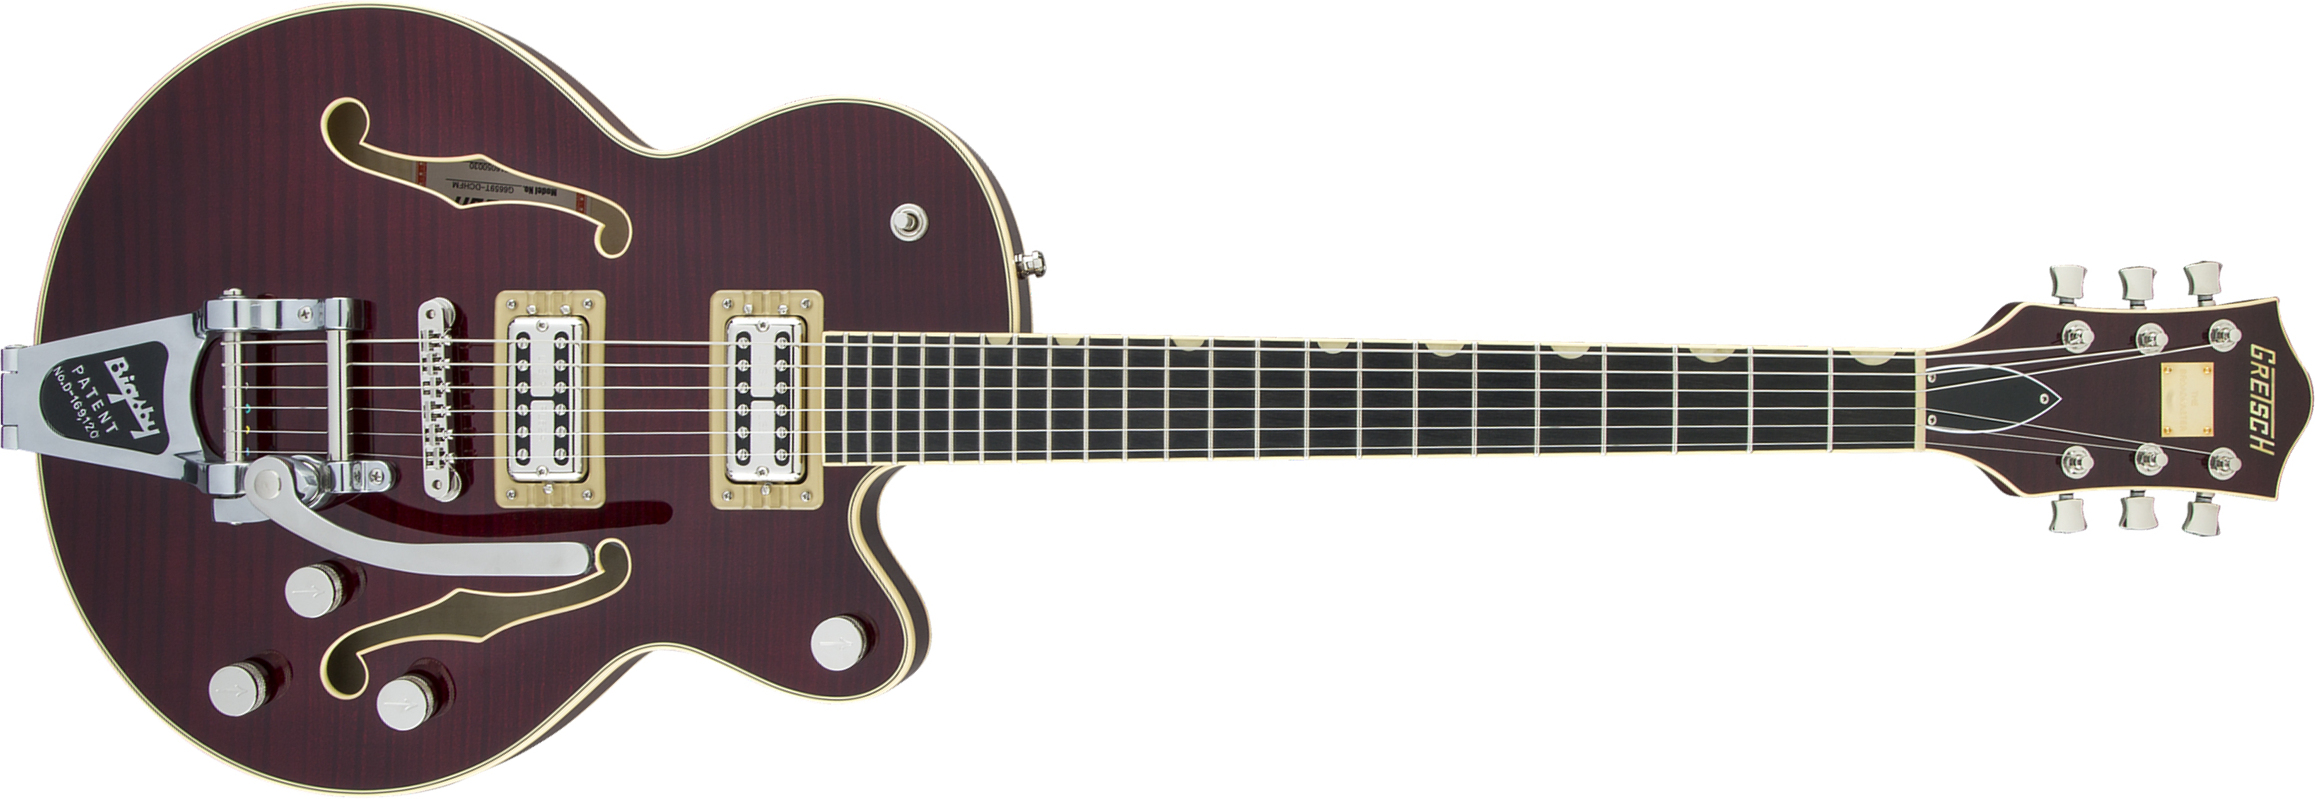 Gretsch G6659tfm Broadkaster Jr Center Bloc Players Edition Pro Jap Bigsby Eb - Dark Cherry Stain - Guitare Électrique 1/2 Caisse - Main picture